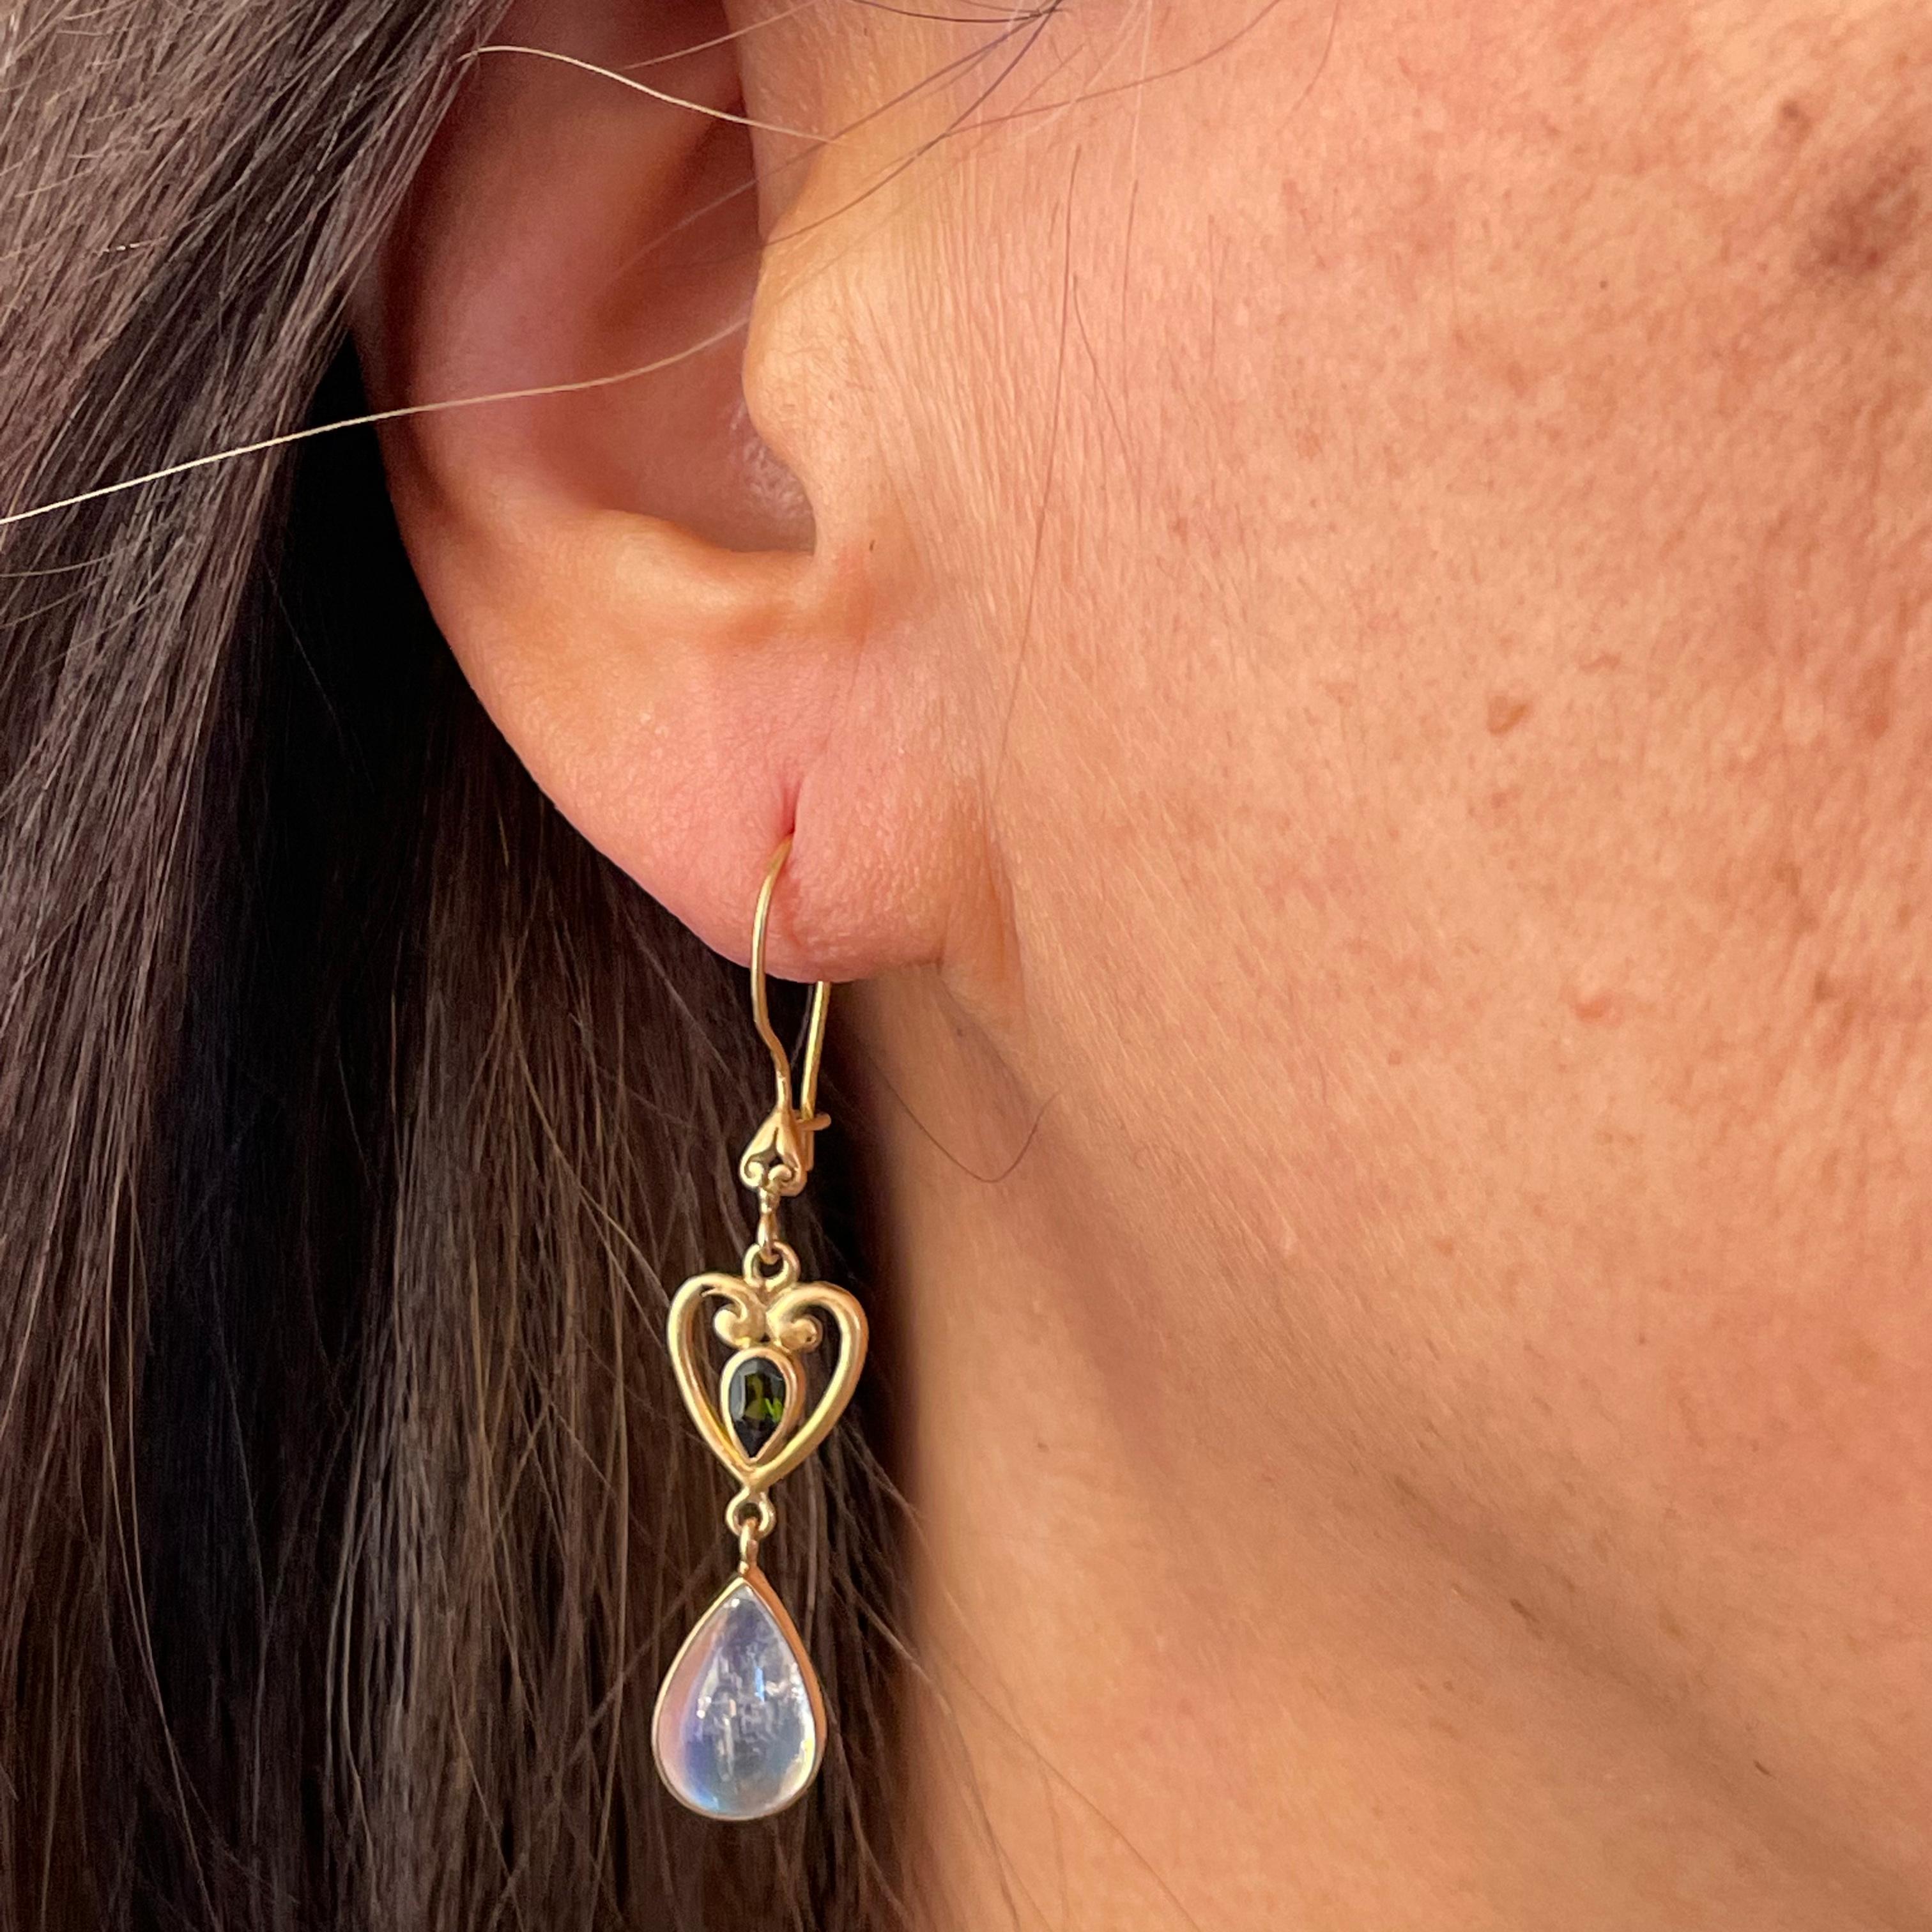 Two shimmering 8 x 12 mm rainbow moonstone pear shaped drops totaling 5 carats are suspended below heart shaped gold components with central small 3 x5 mm faceted green tourmalines in this Steven Battelle design. Safety clasp wires. 
